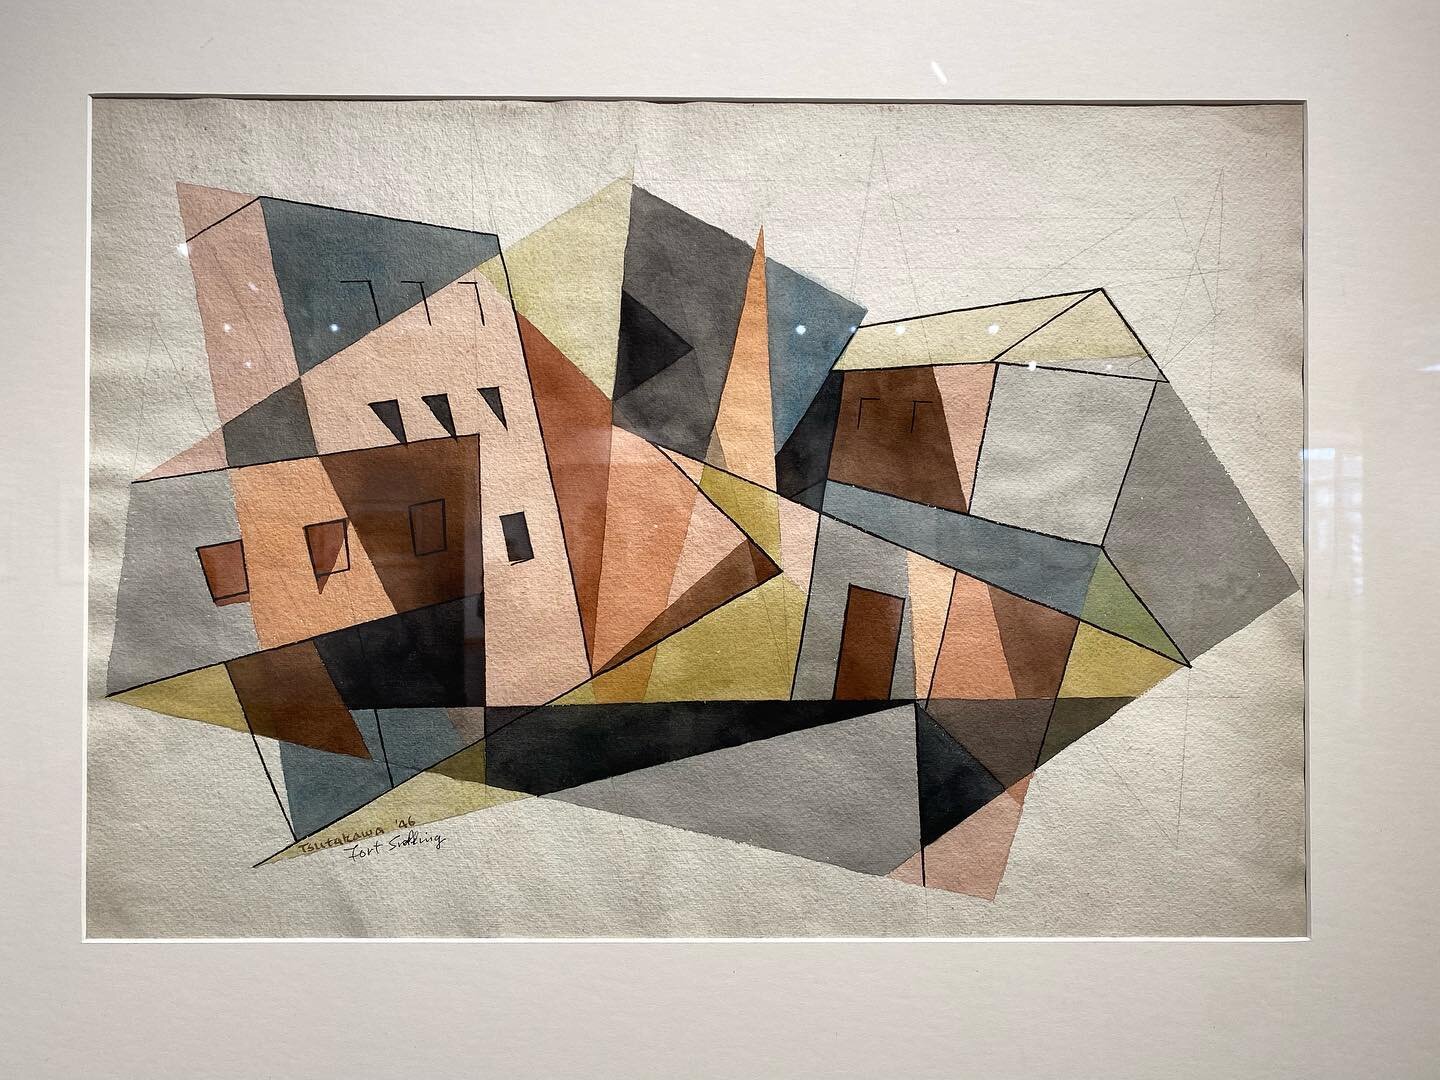 Last few days to catch the phenomenal show of George Tsutakawa&rsquo;s early works on paper, @cascadiaartmuseum . Not only will you see how a sculptor thinks in 2D, you will get a fascinating glimpse into the Seattle mid-century art scene, as well as